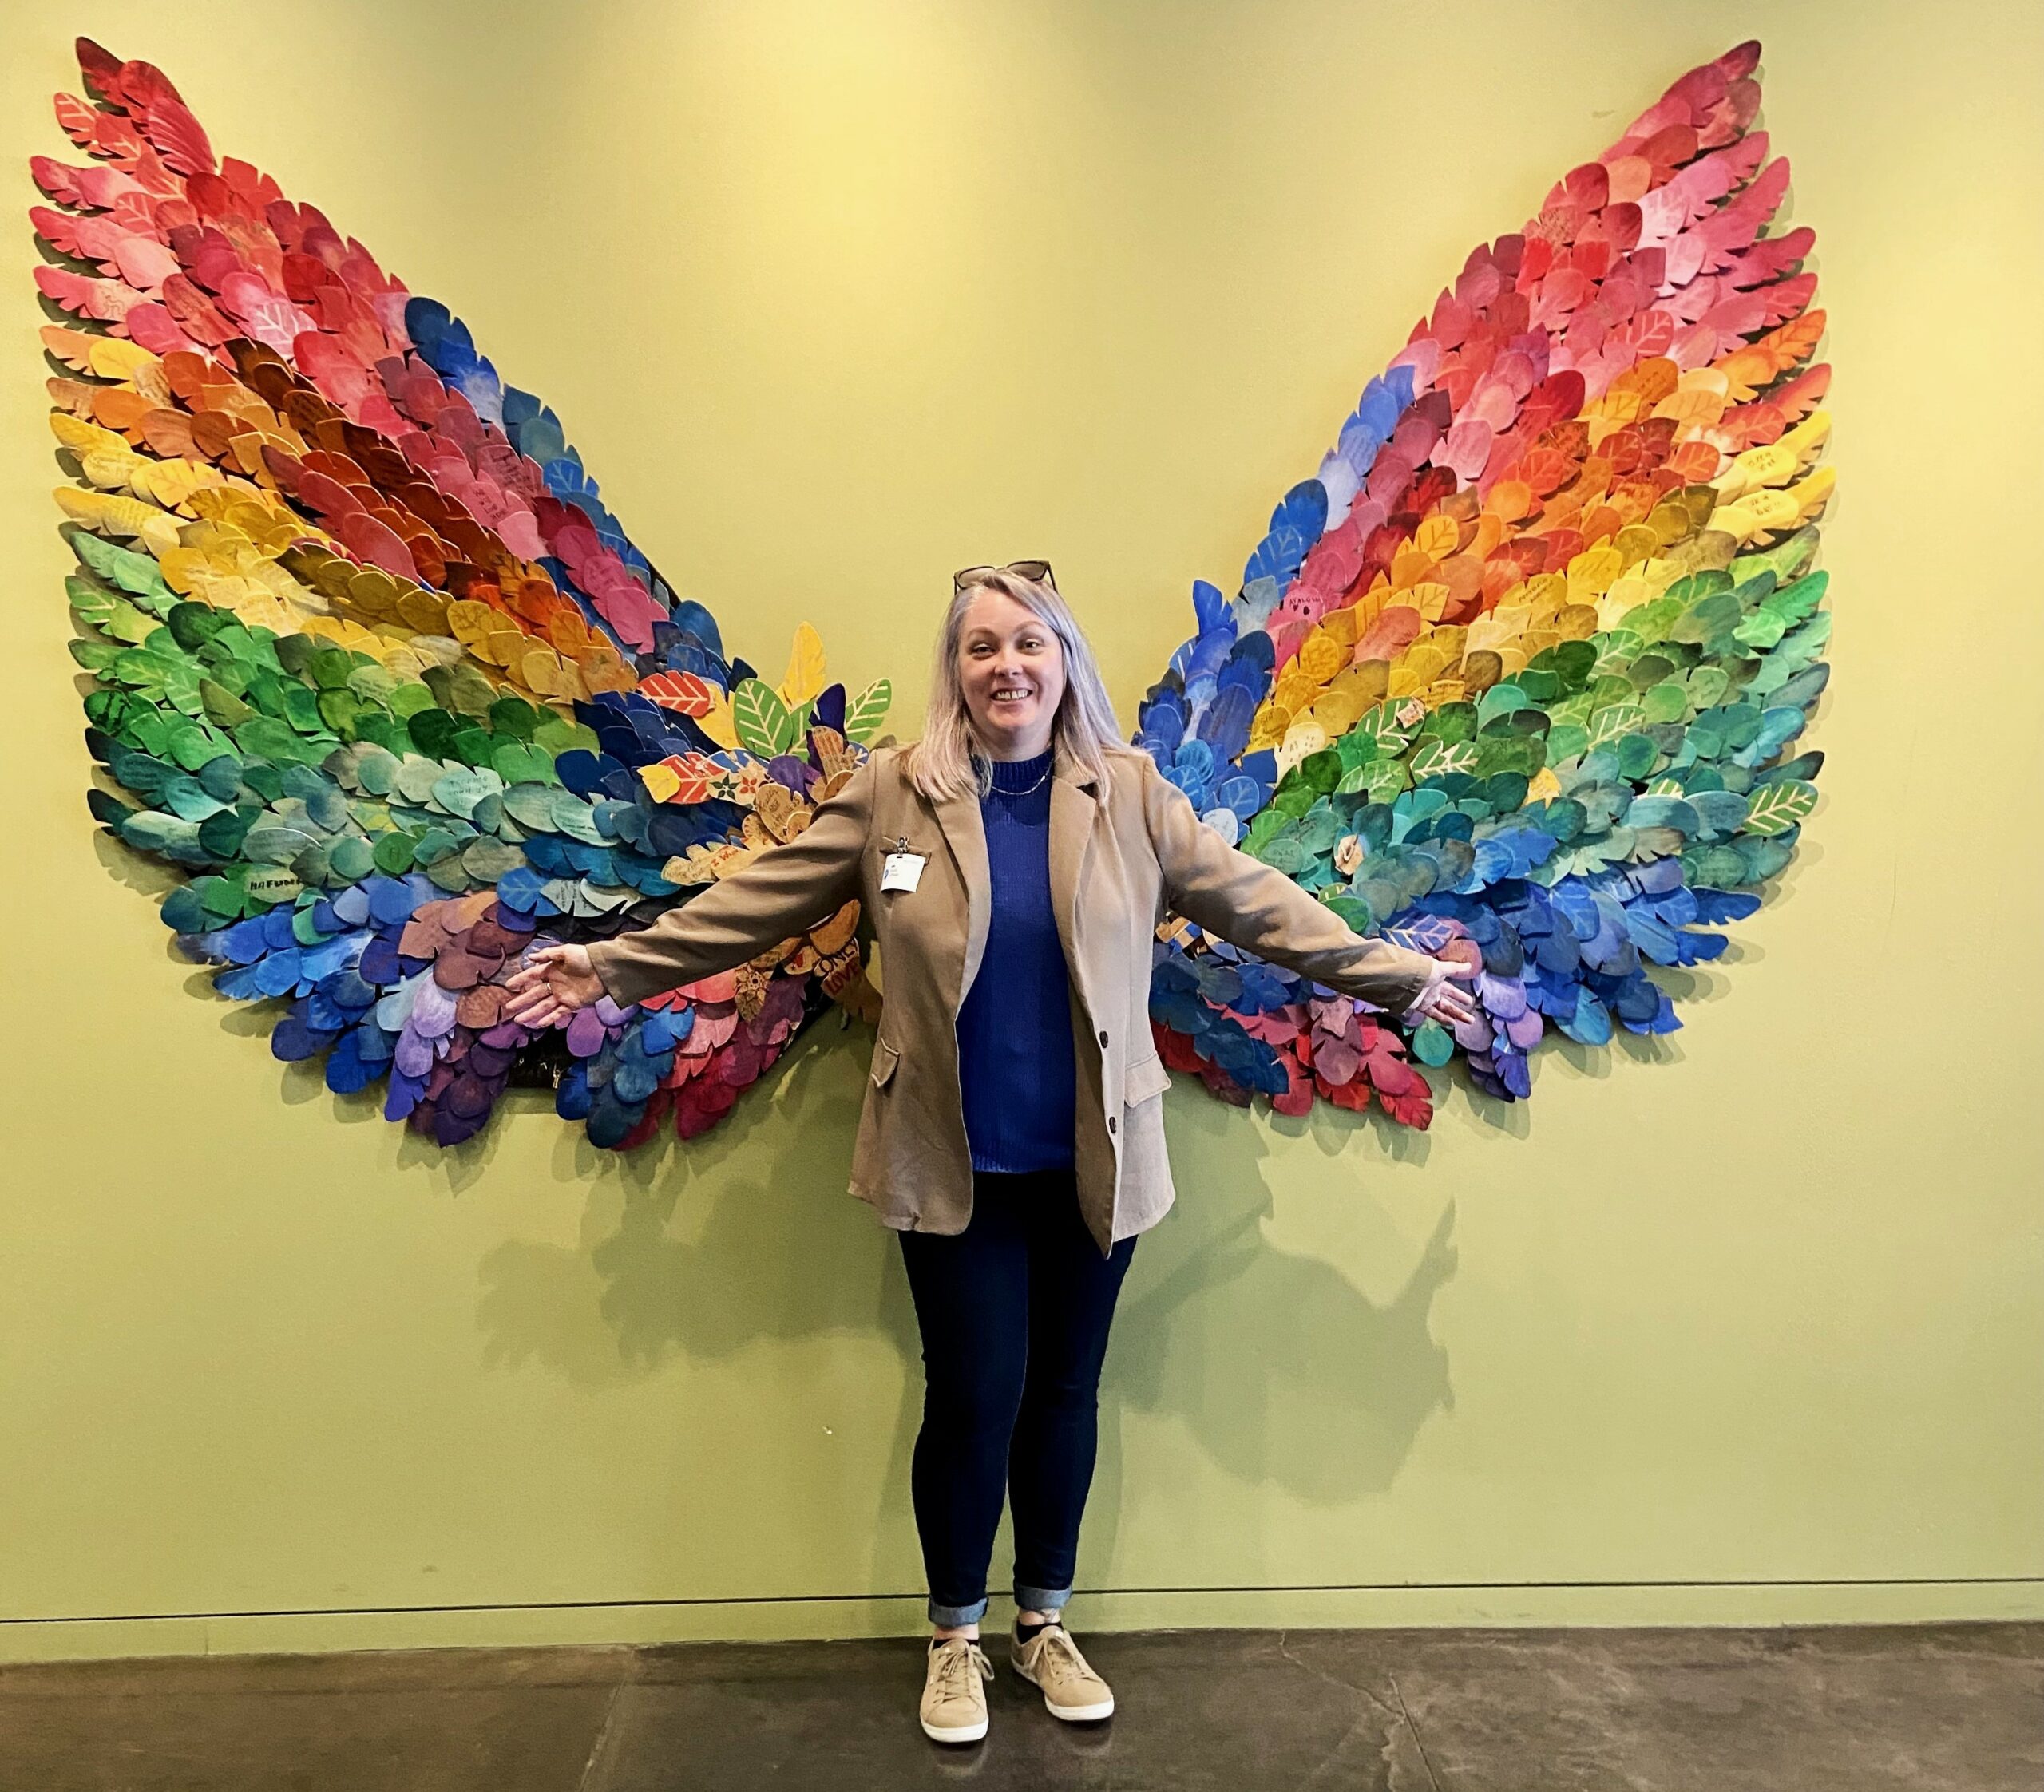 Pavlus Travel's Sarah Schwab likes to spread her wings and explore the world. Here she is shown at the Microsoft office in Seattle, WA. Photo by Sarah Schwab.